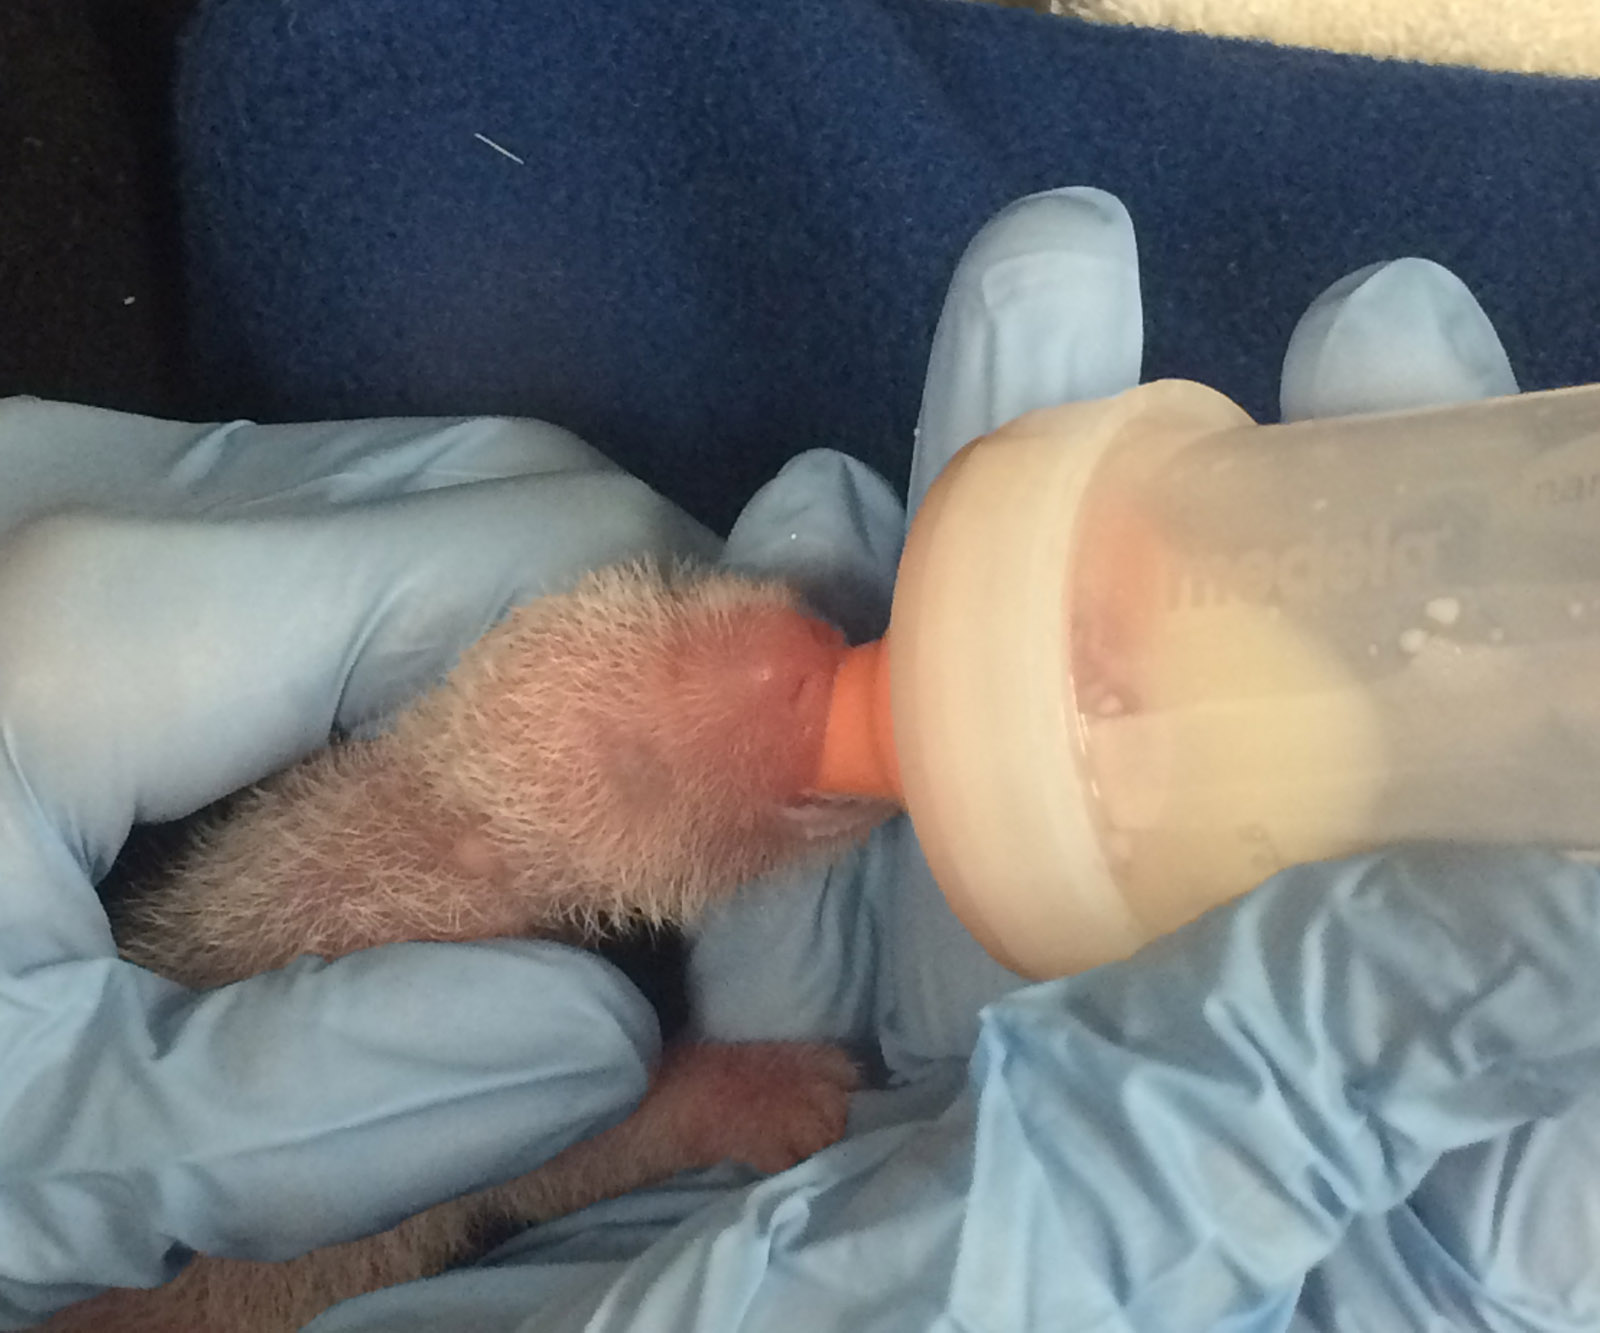 National Zoo: One of the giant panda cubs has died